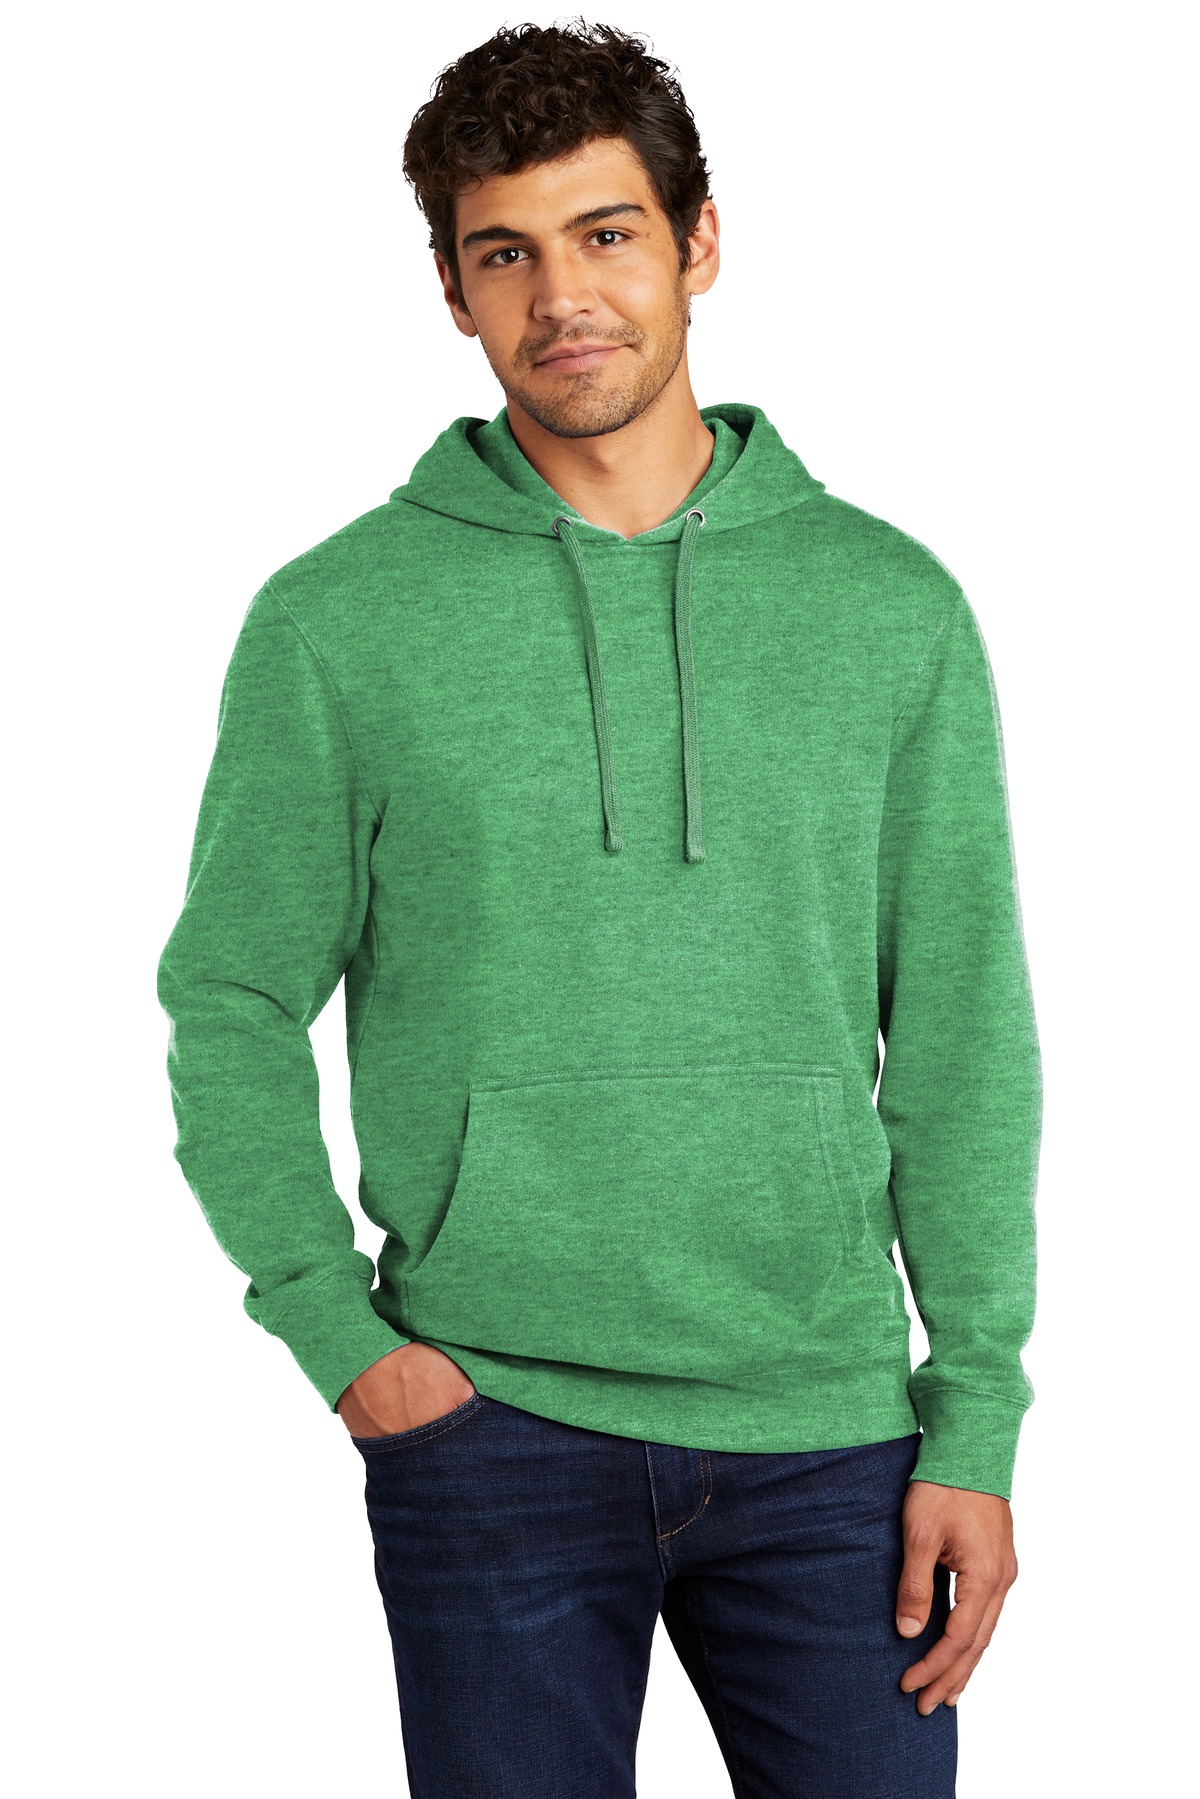 click to view Heathered Kelly Green